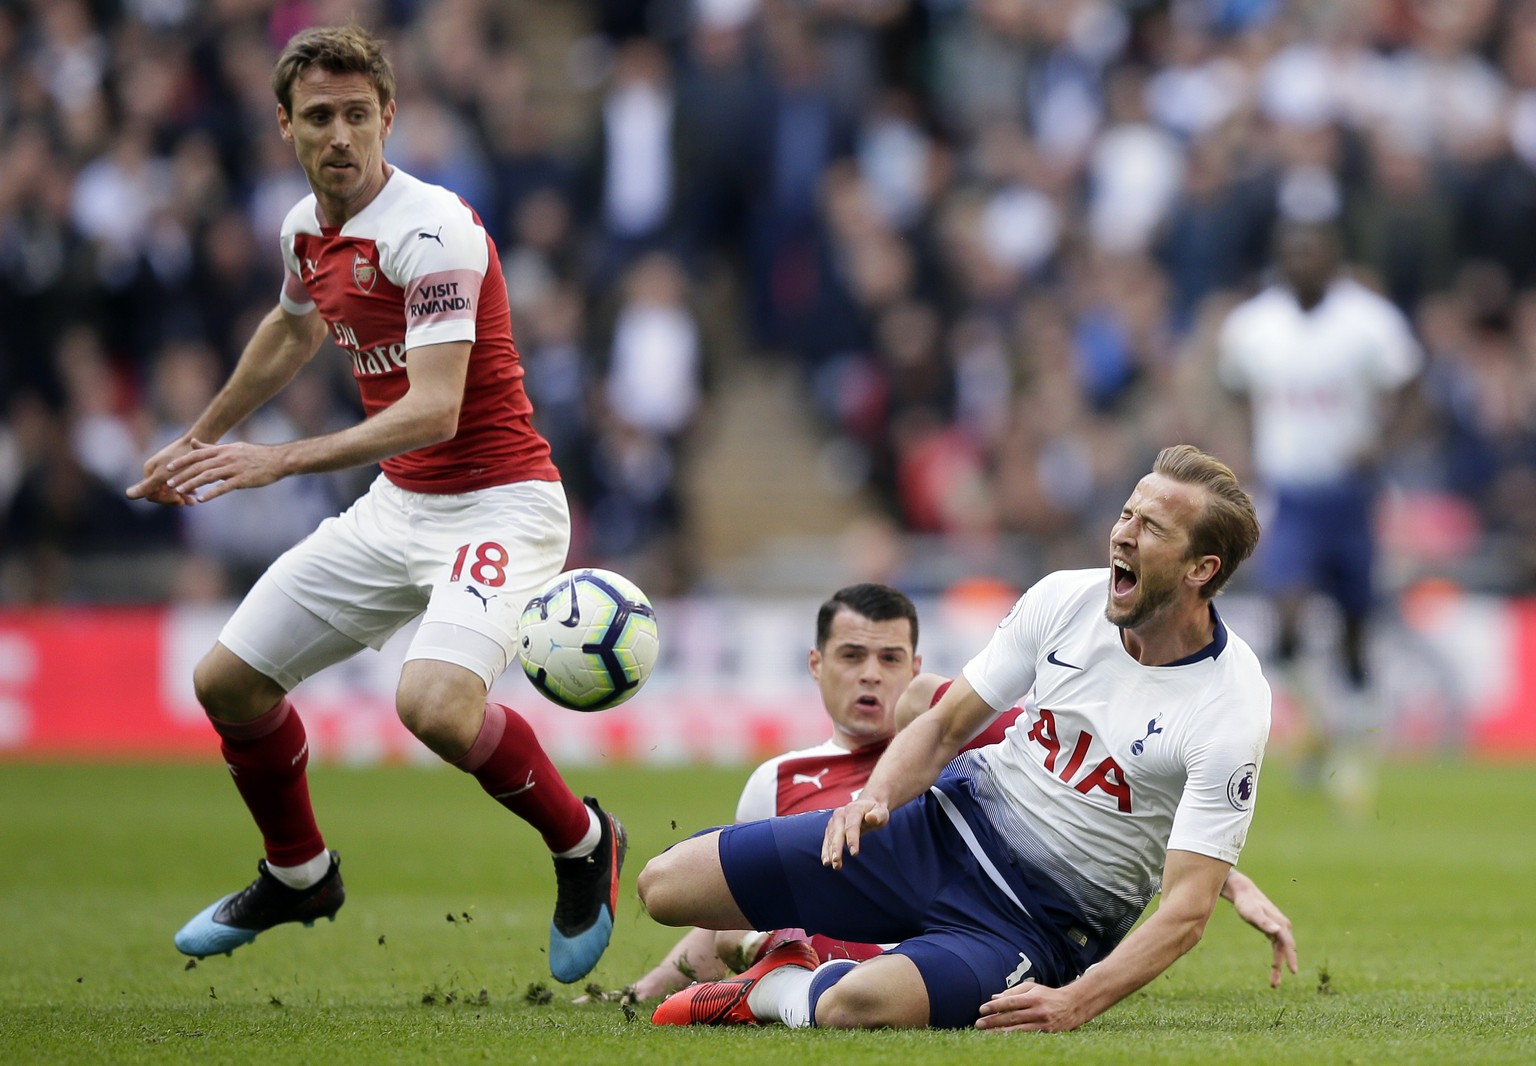 Tottenham&#039;s Harry Kane, front right, duels for the ball with Arsenal&#039;s Granit Xhaka during the English Premier League soccer match between Tottenham Hotspur and Arsenal at Wembley stadium in ...